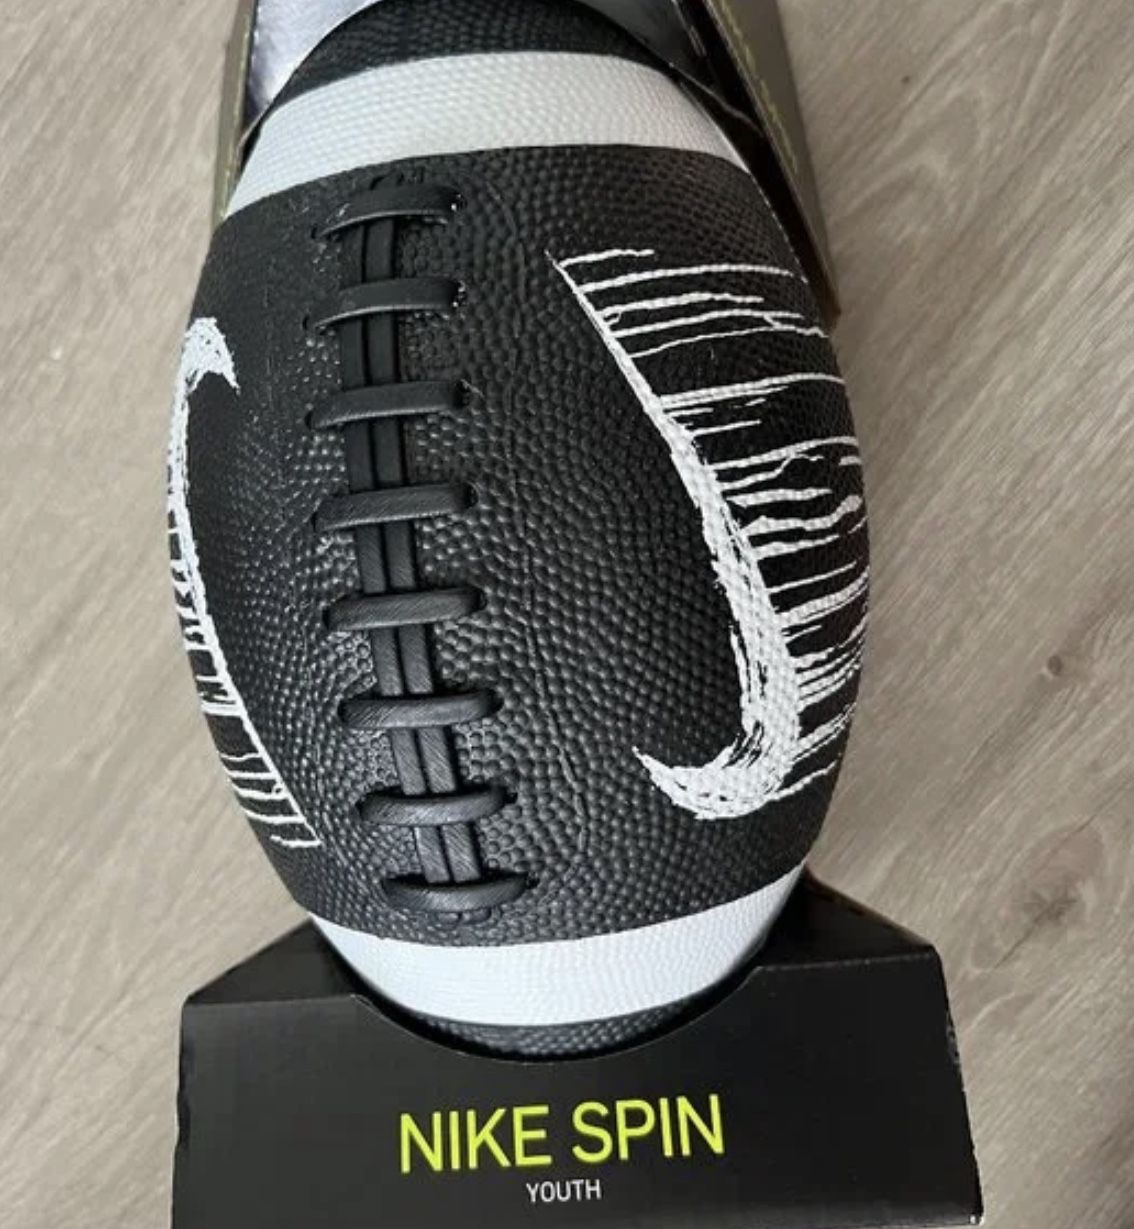 Youth Football Nike Spin Ball - New 